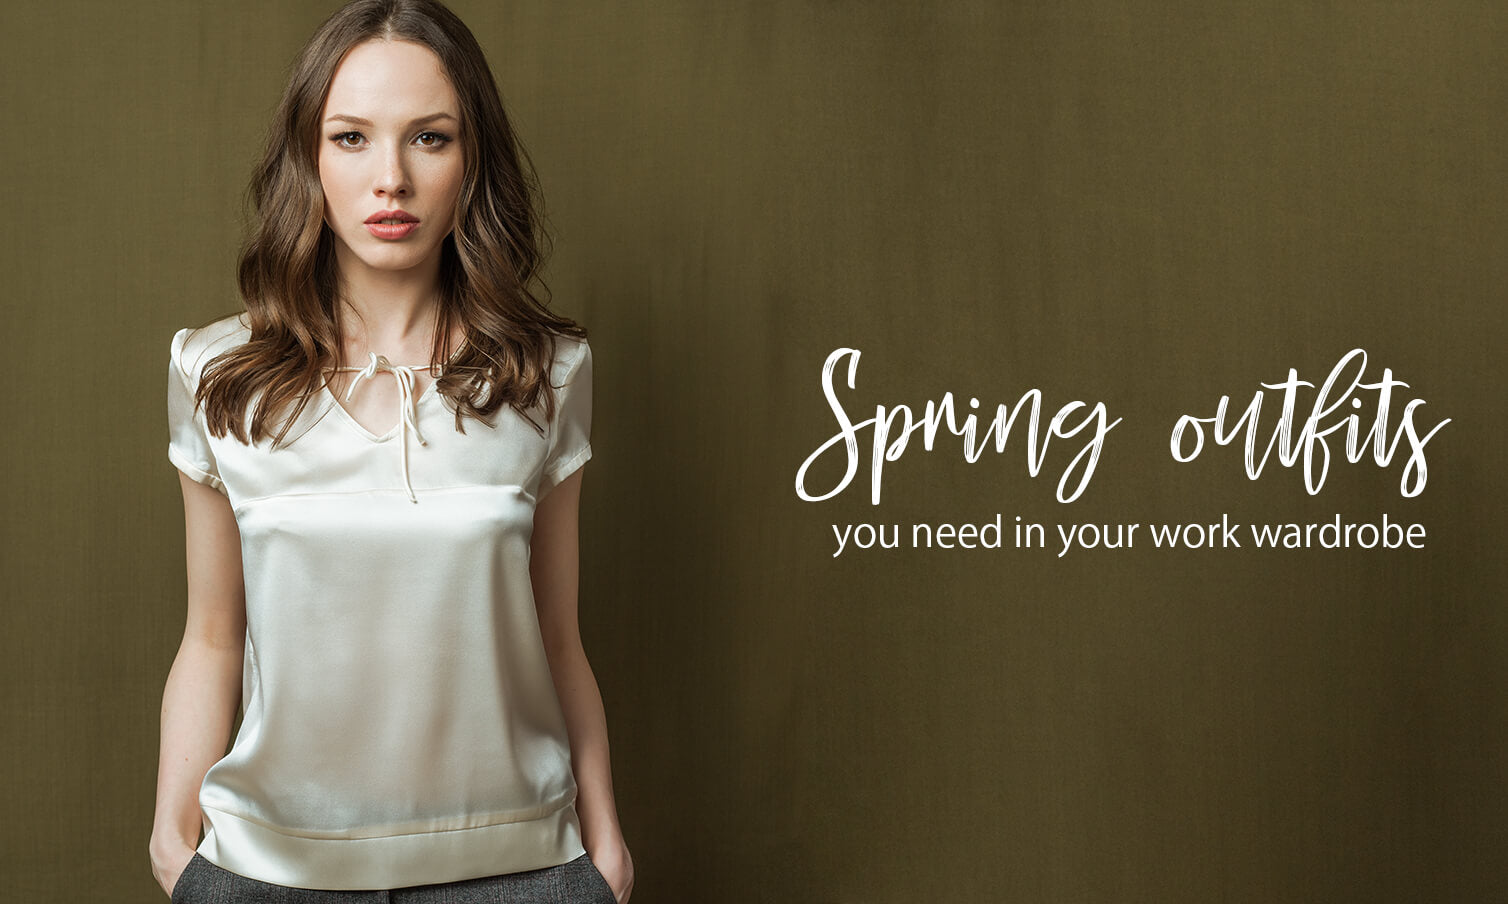 Spring outfits you need in your wardrobe